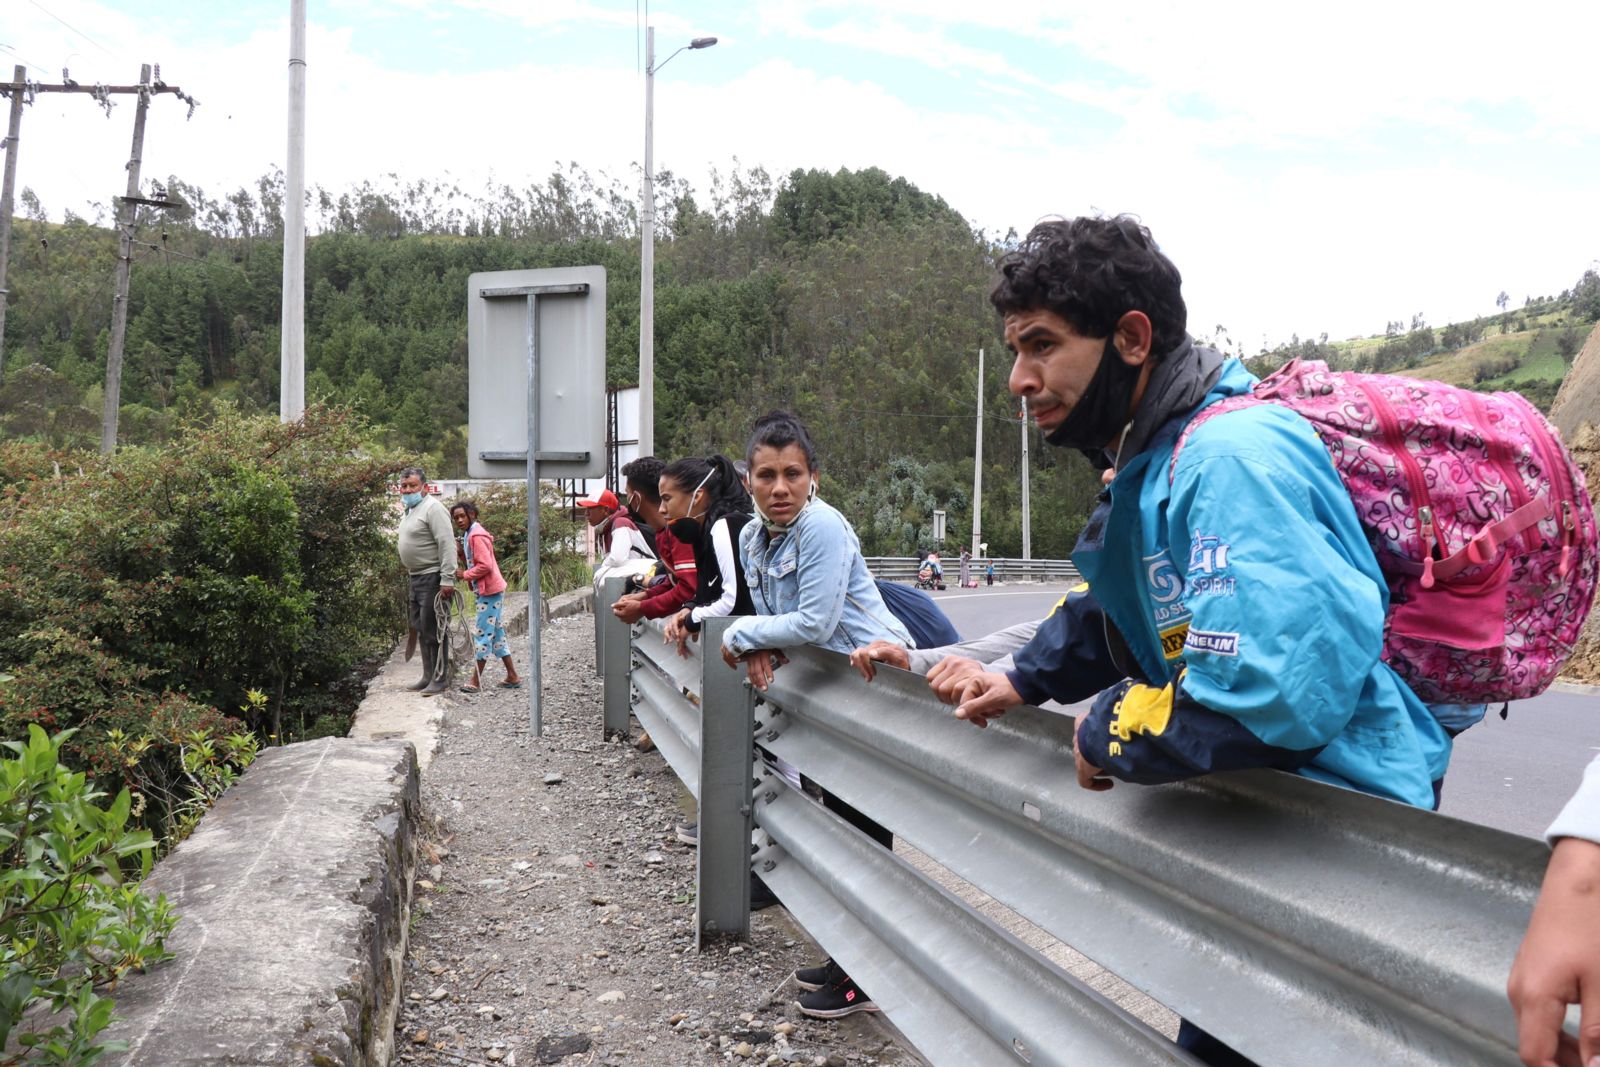 Refugees and migrants in Ecuador face rising risks among decreased protections